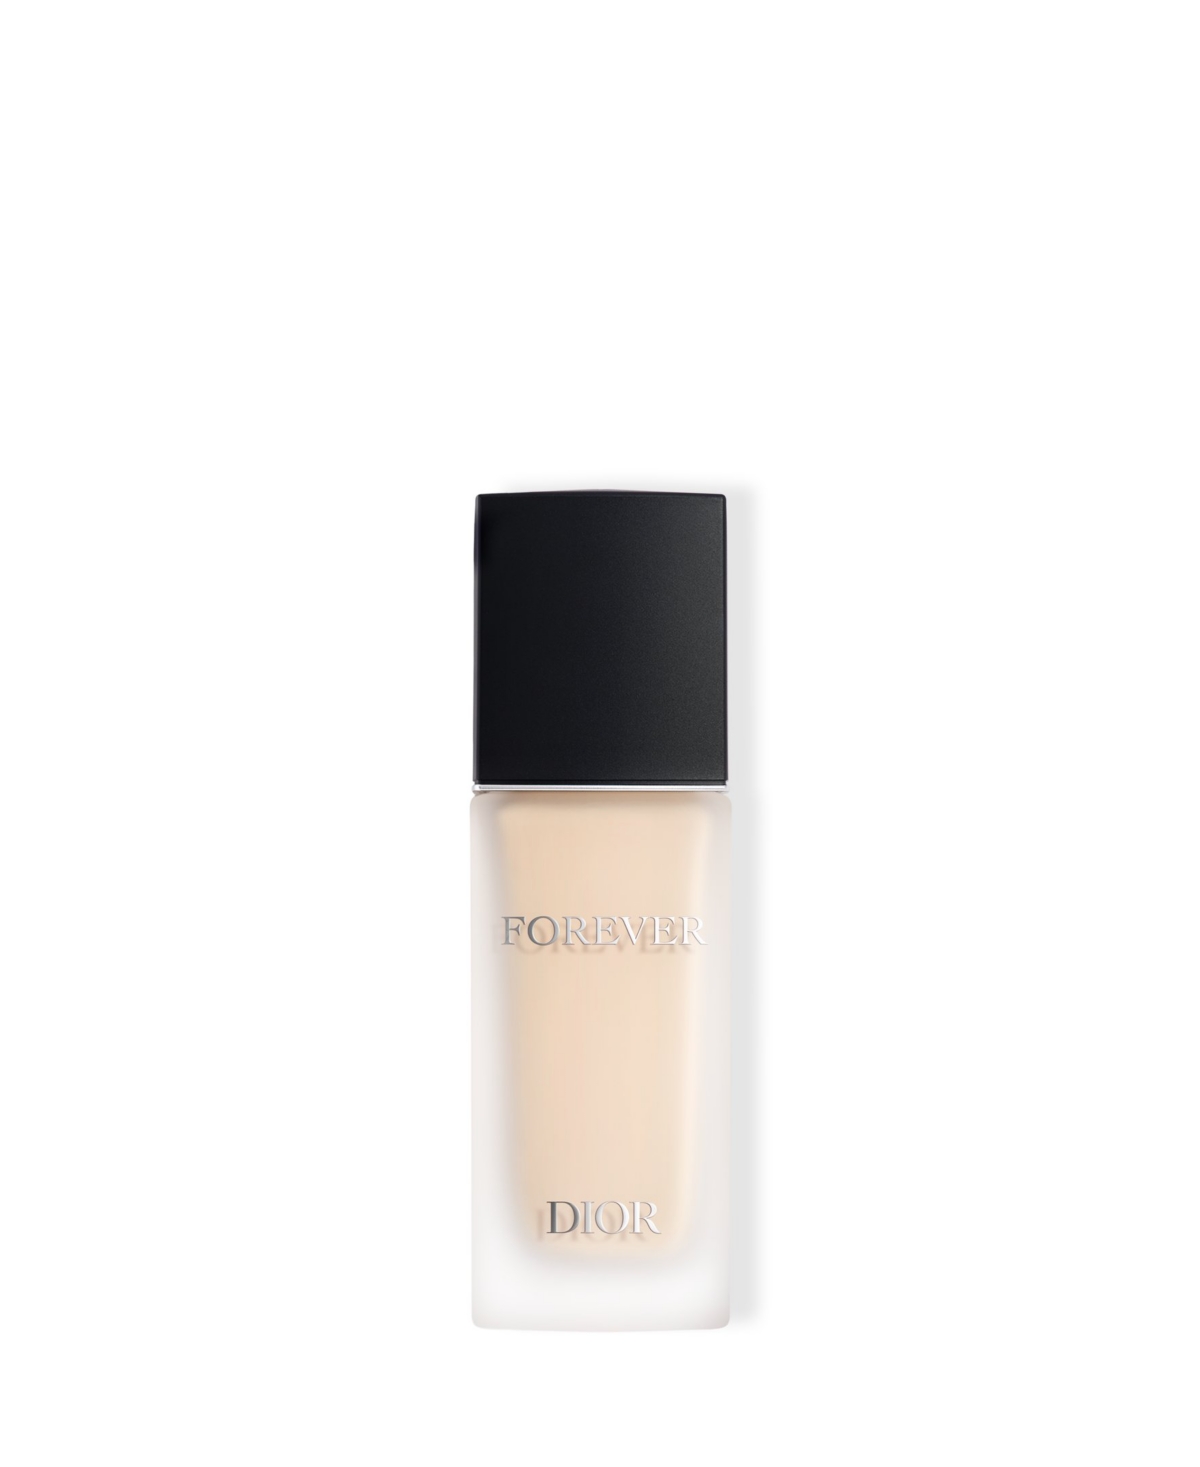 Dior Forever Matte Skincare Foundation Spf 15 In Olive (fair Skin With Neutral Tones)